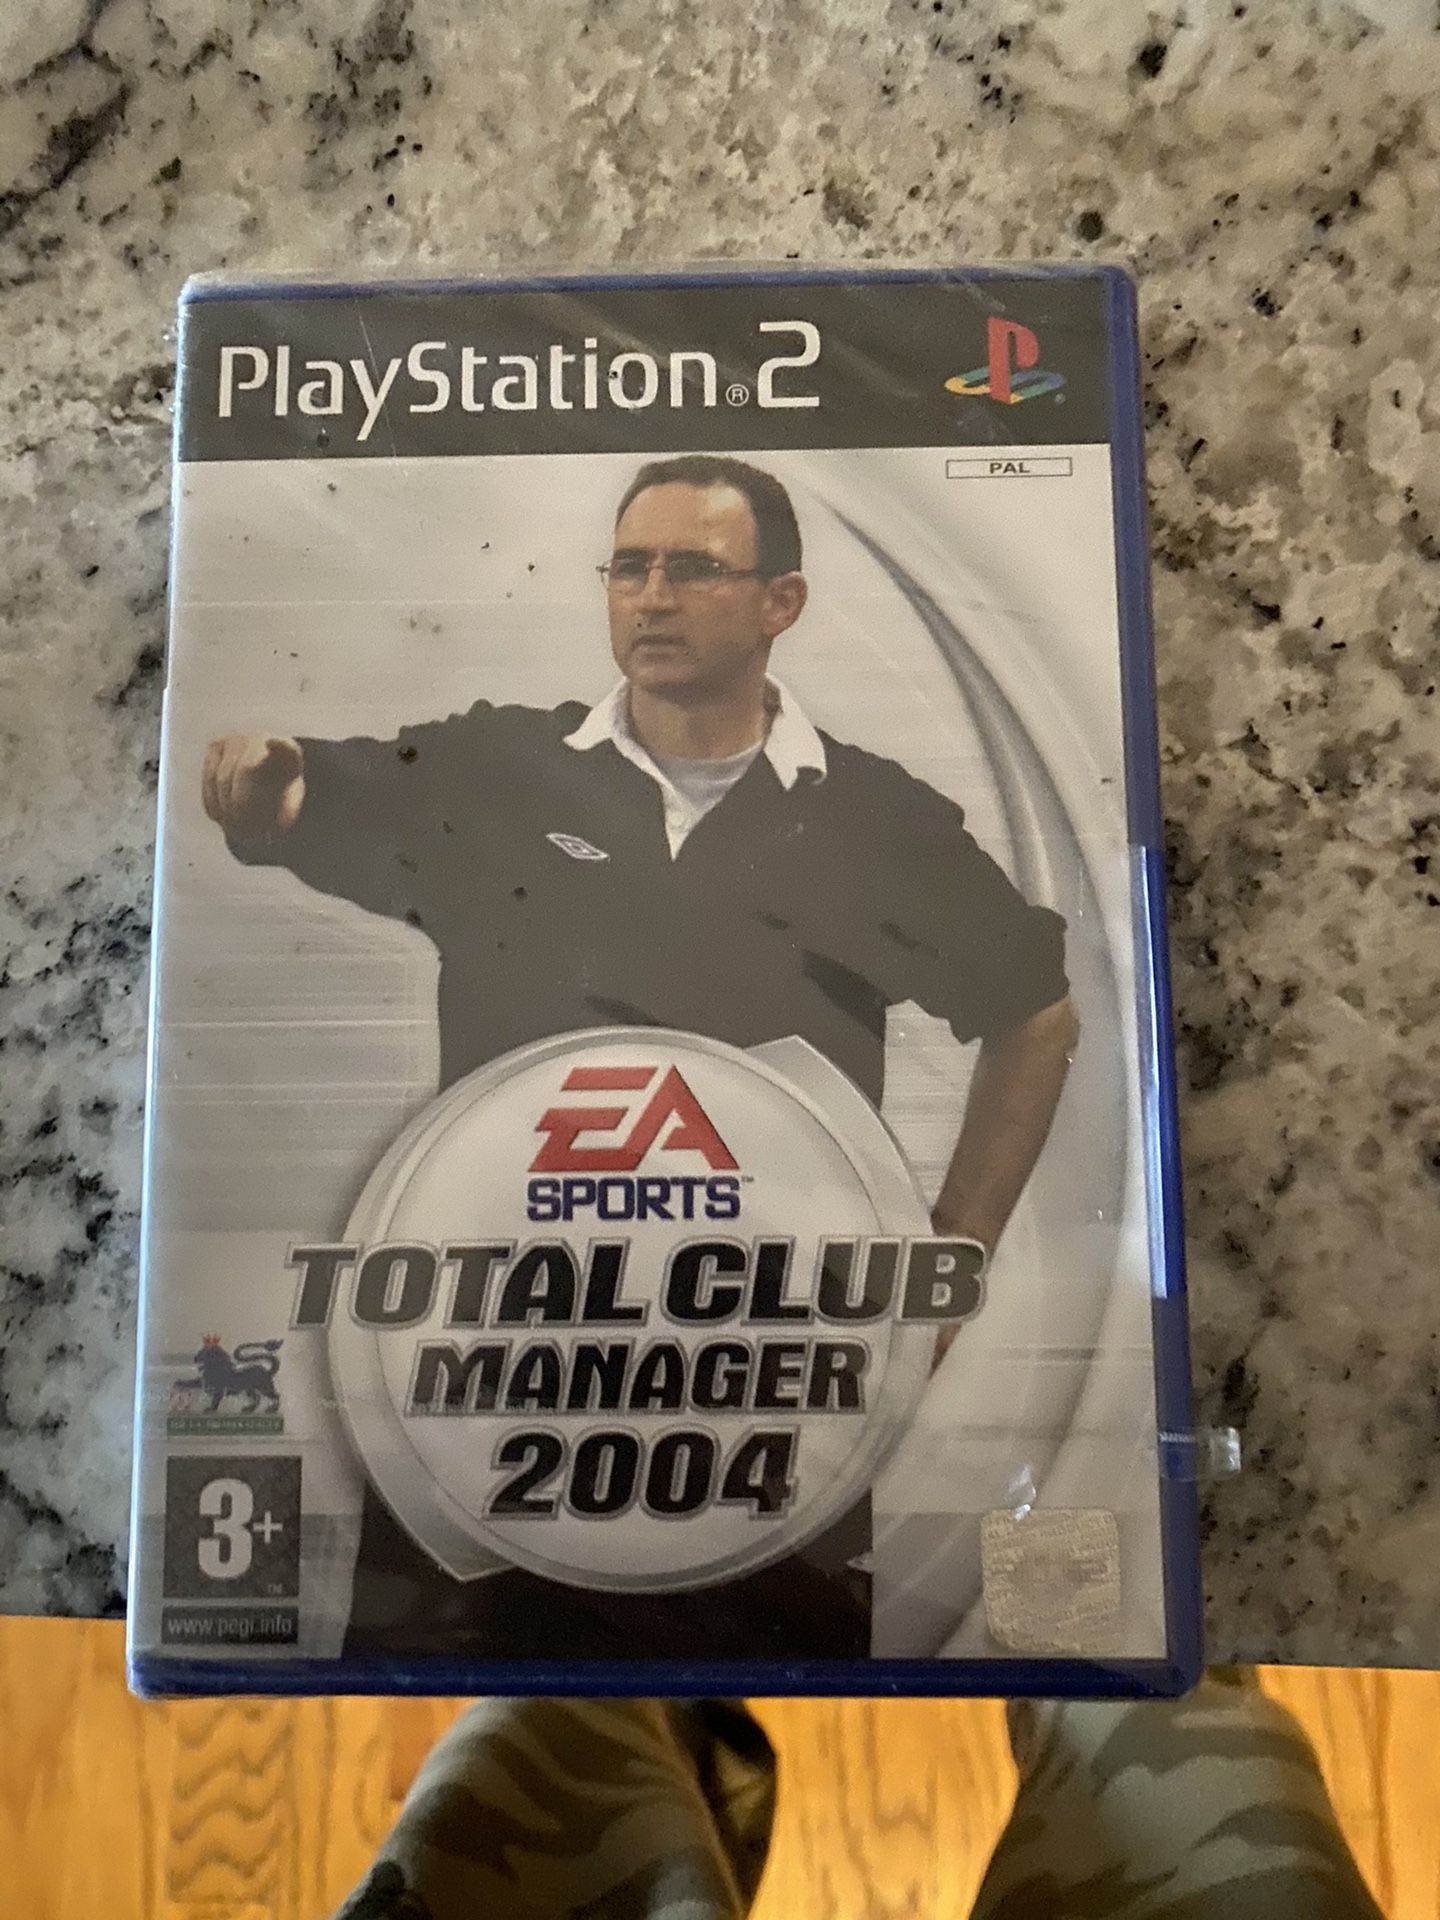  Total club manager 2004